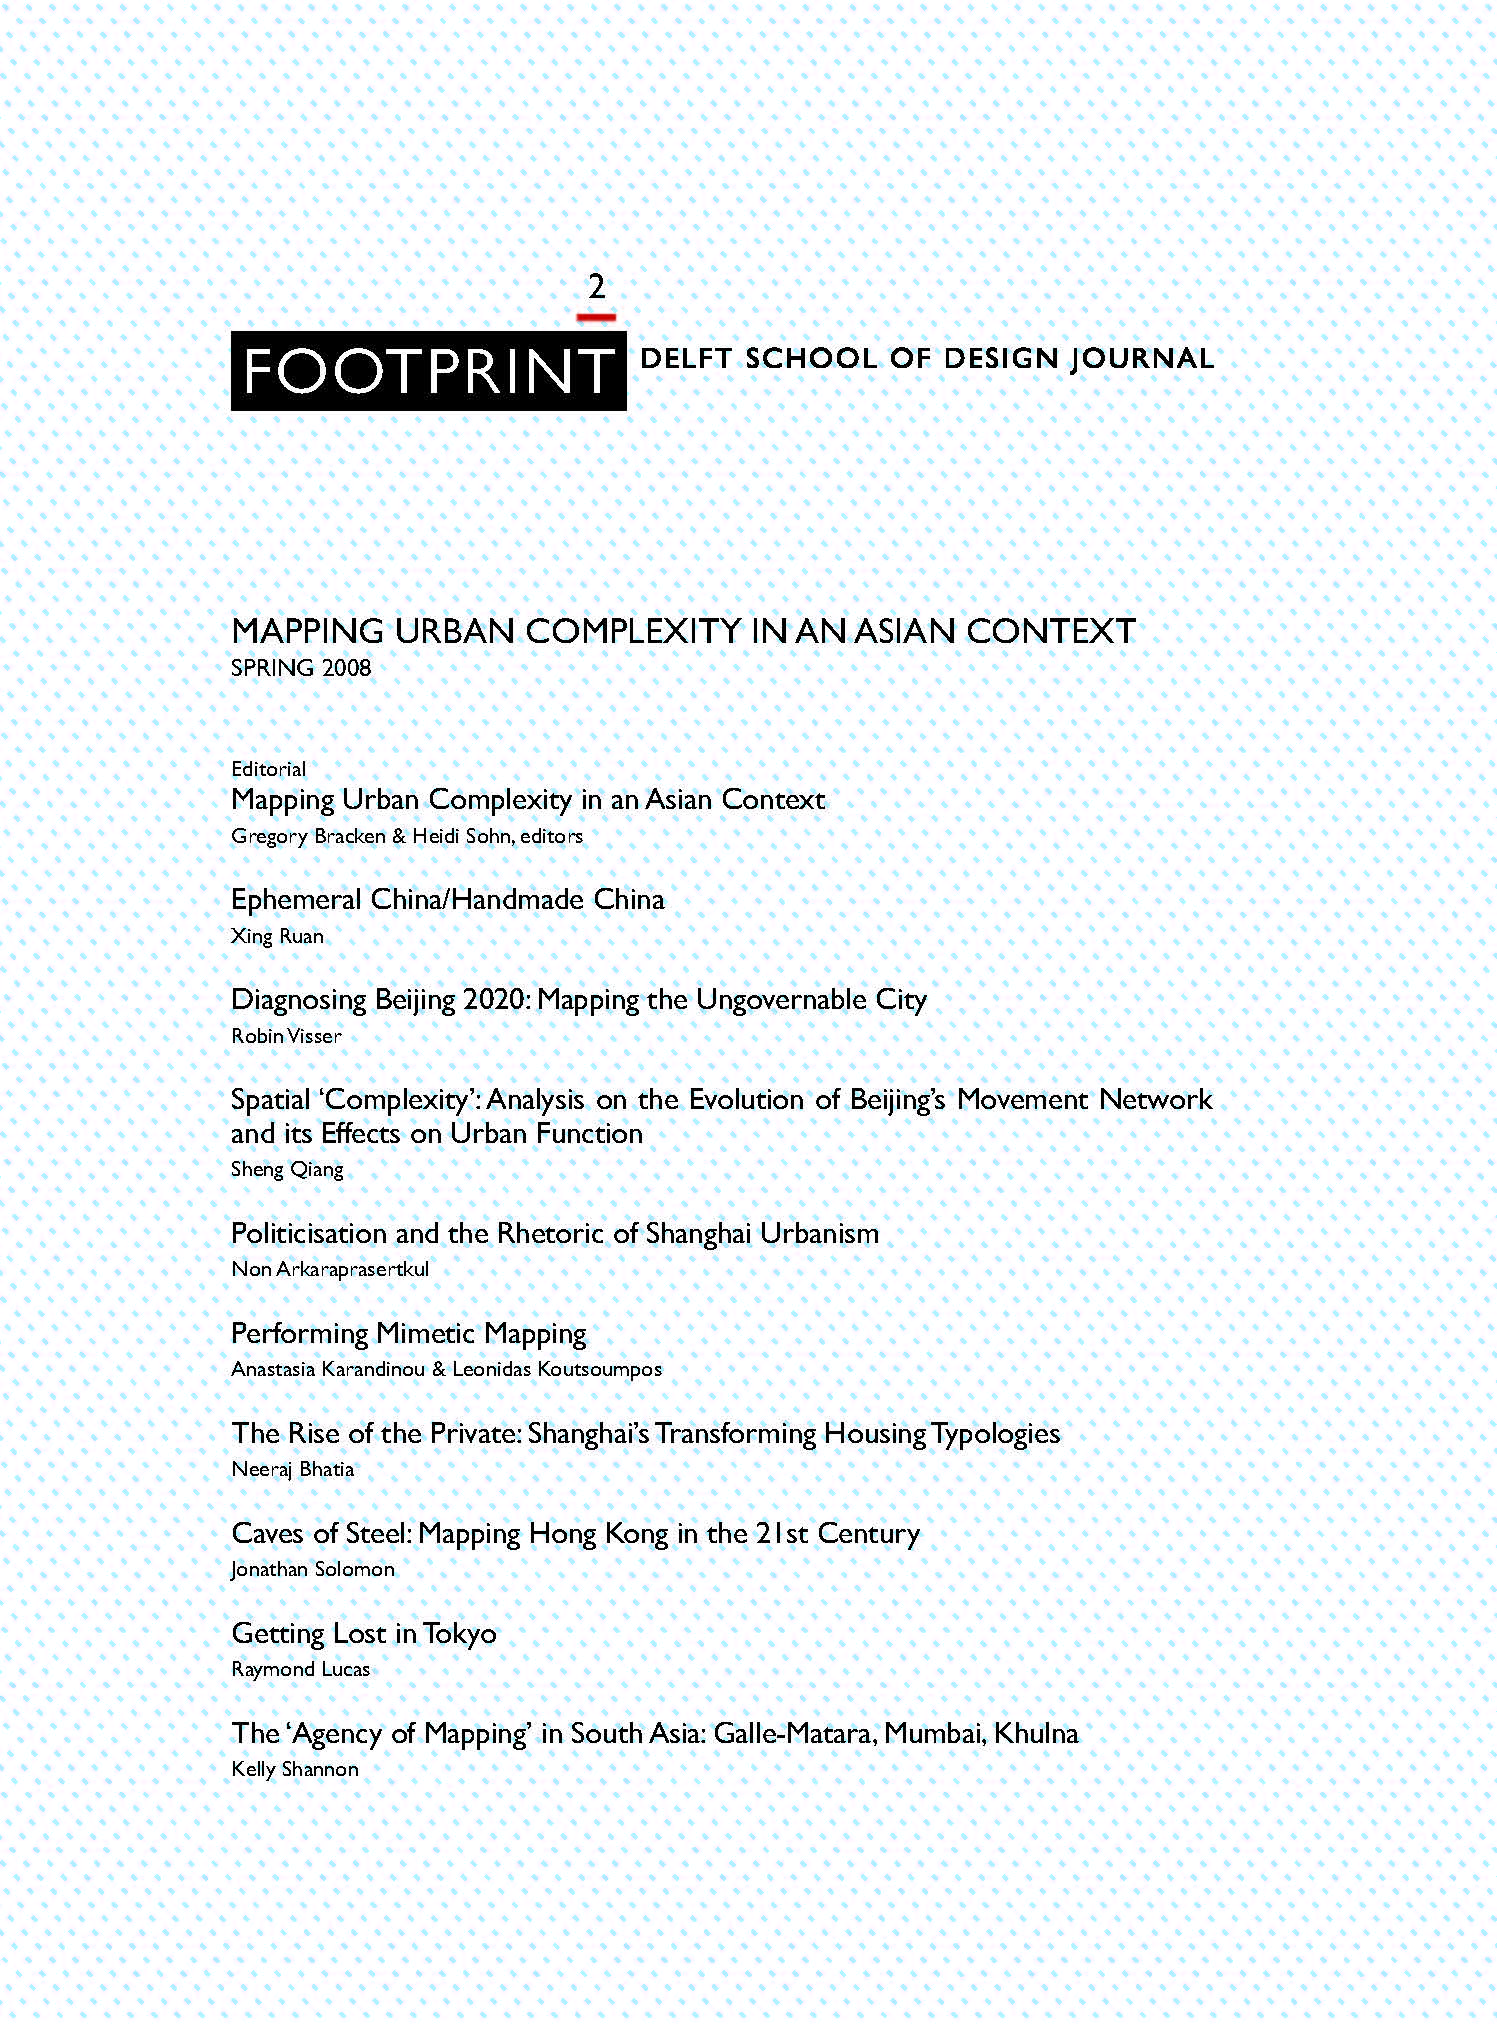 					View Issue # 2 | Spring 2008 | Mapping Urban Complexity in an Asian Context
				